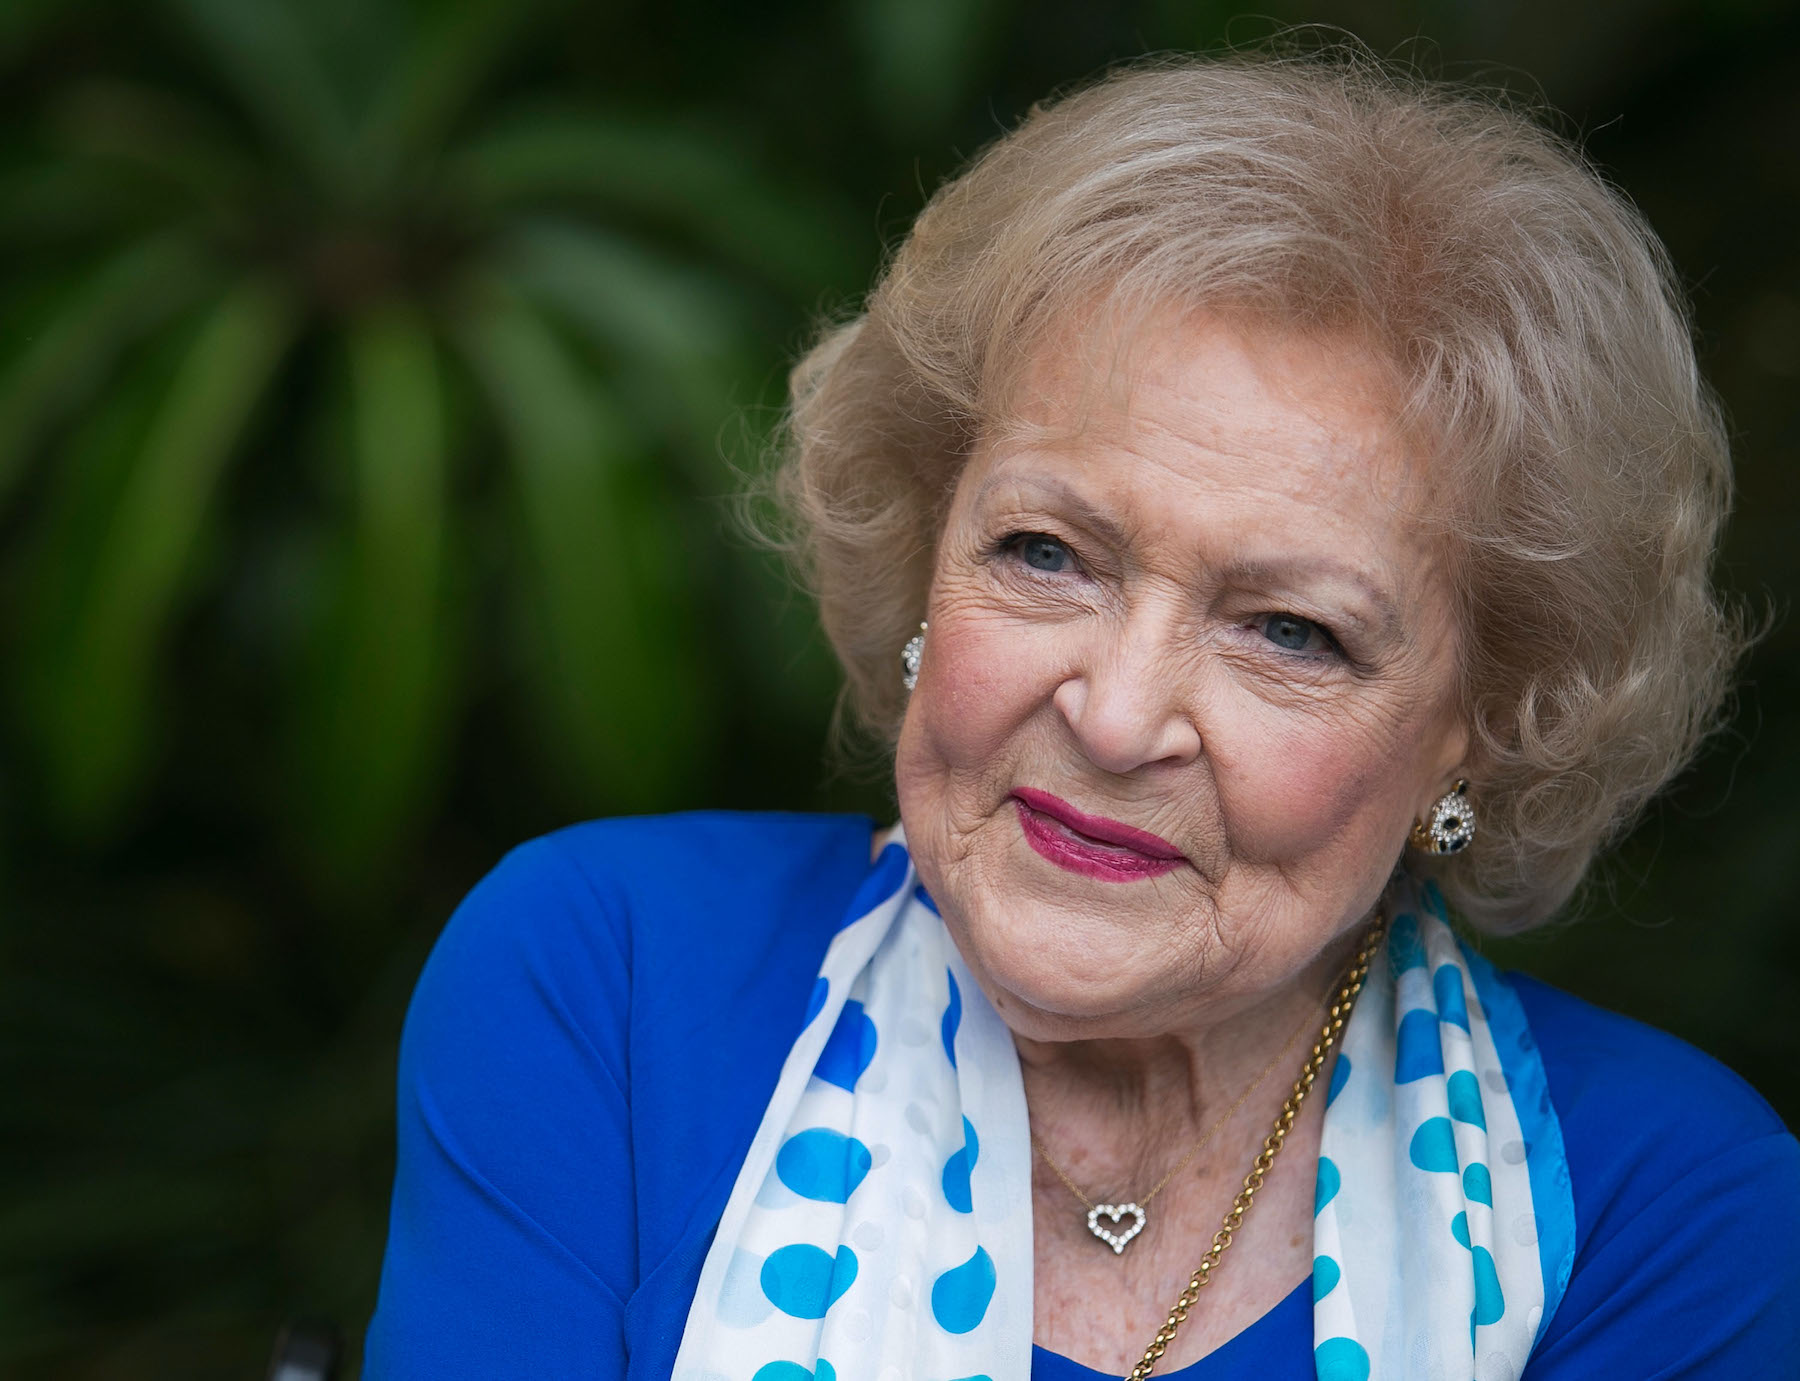 LOS ANGELES, CA - JUNE 11:  Actress Betty White attends the media preview for Greater Los Angeles Zoo Association's Beastly Ball fundraiser at Los Angeles Zoo on June 11, 2015 in Los Angeles, California.  (Photo by Vincent Sandoval/WireImage)